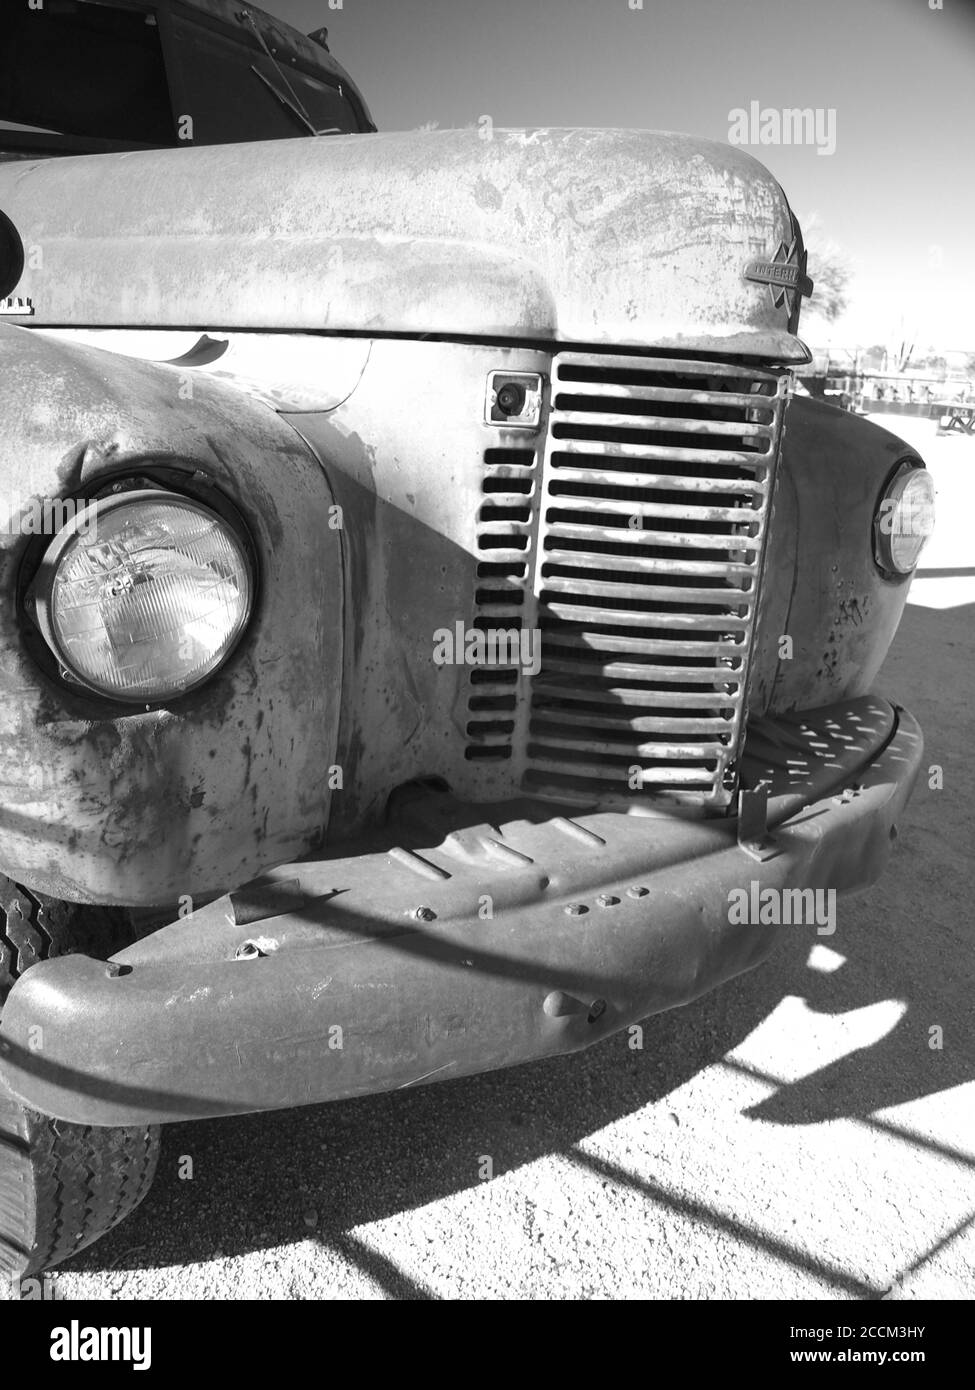 Black and white  image of an old International flatbed truck near Scottsdale, Arizona, USA.  Derelict truck is forlorn sitting in the desert. Stock Photo